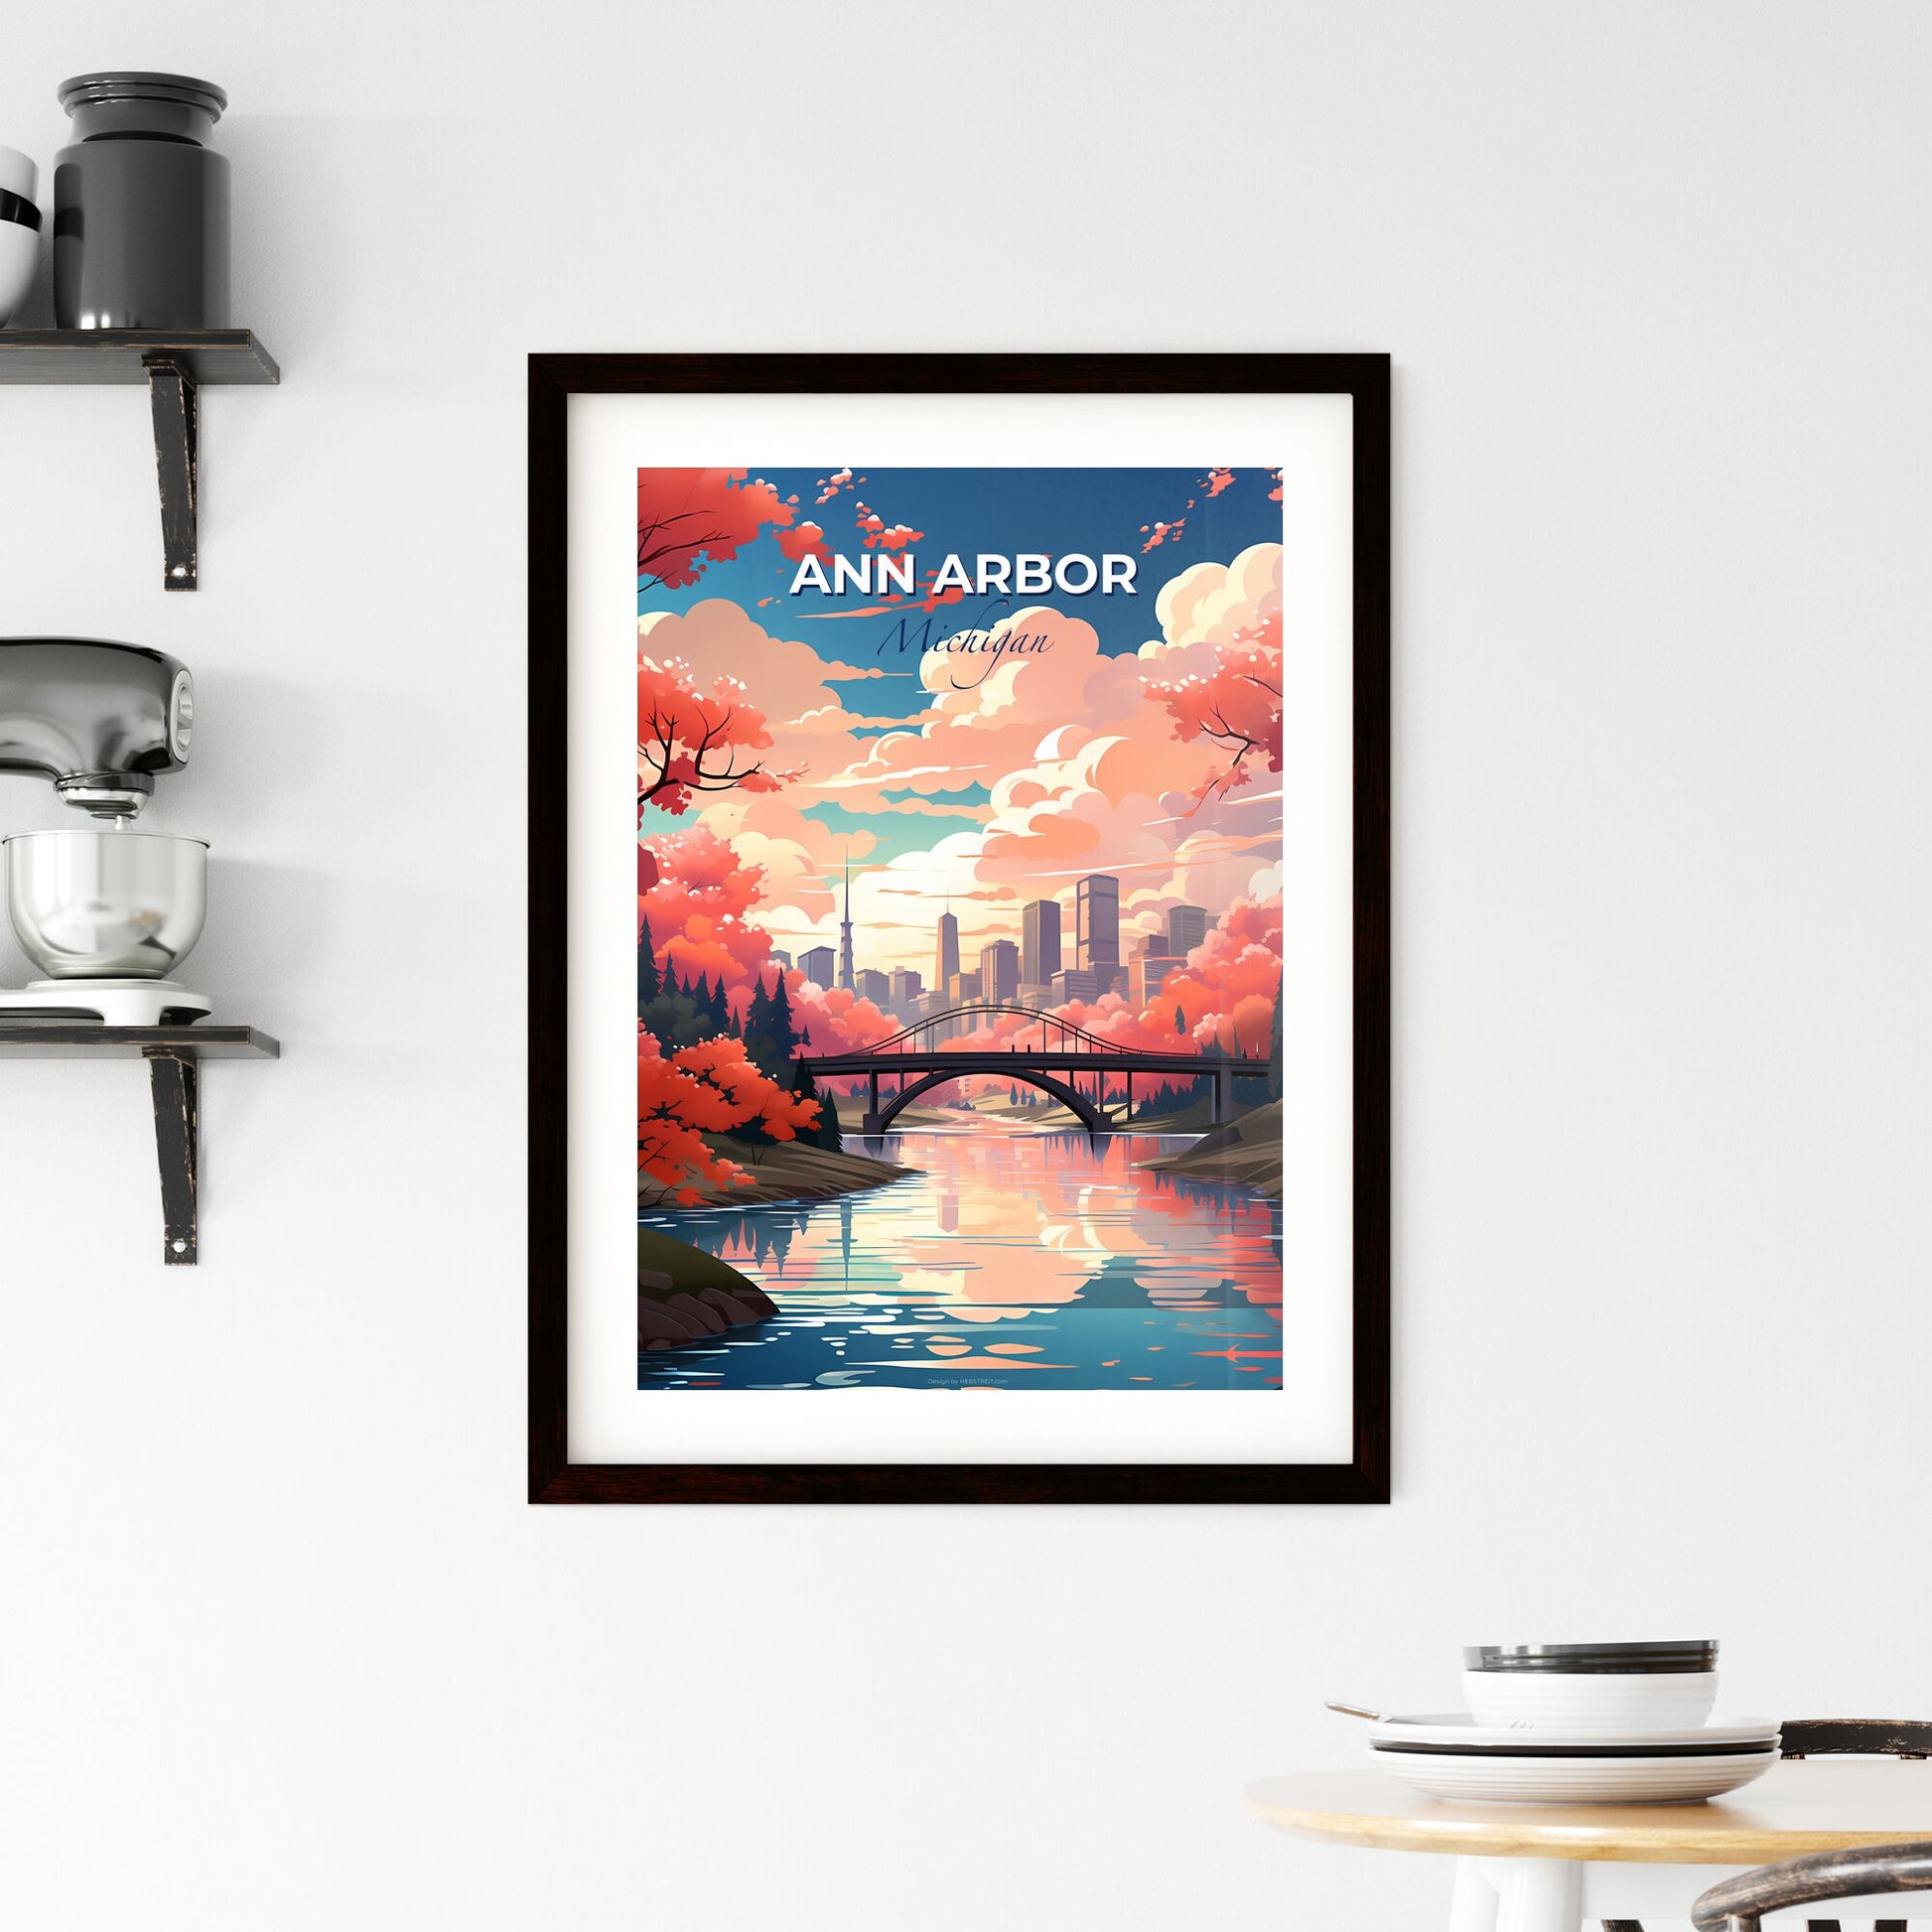 Ann Arbor, Michigan, A Poster of a bridge over a river with trees and a city in the background Default Title